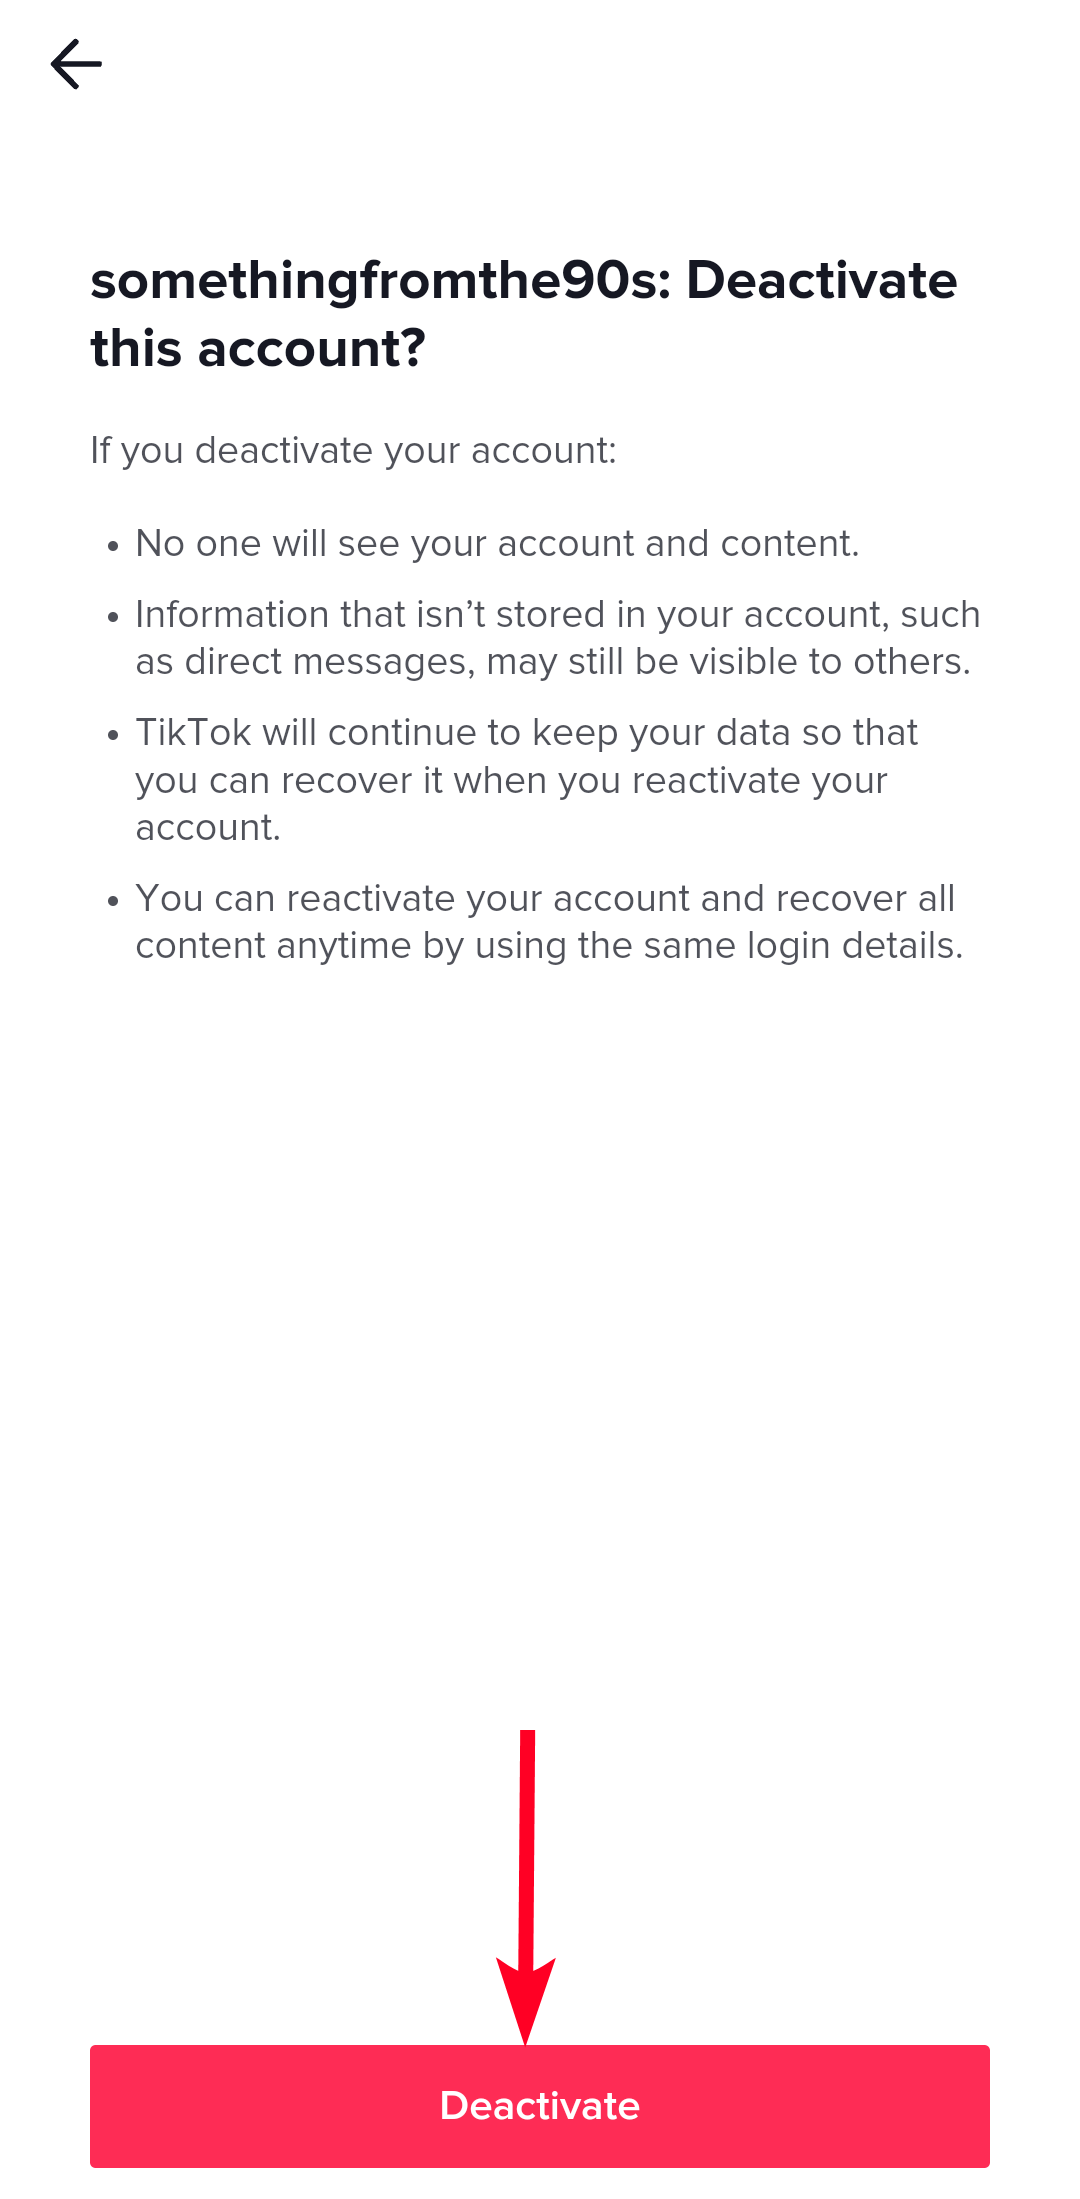 List of consequences for deactivating your TikTok account